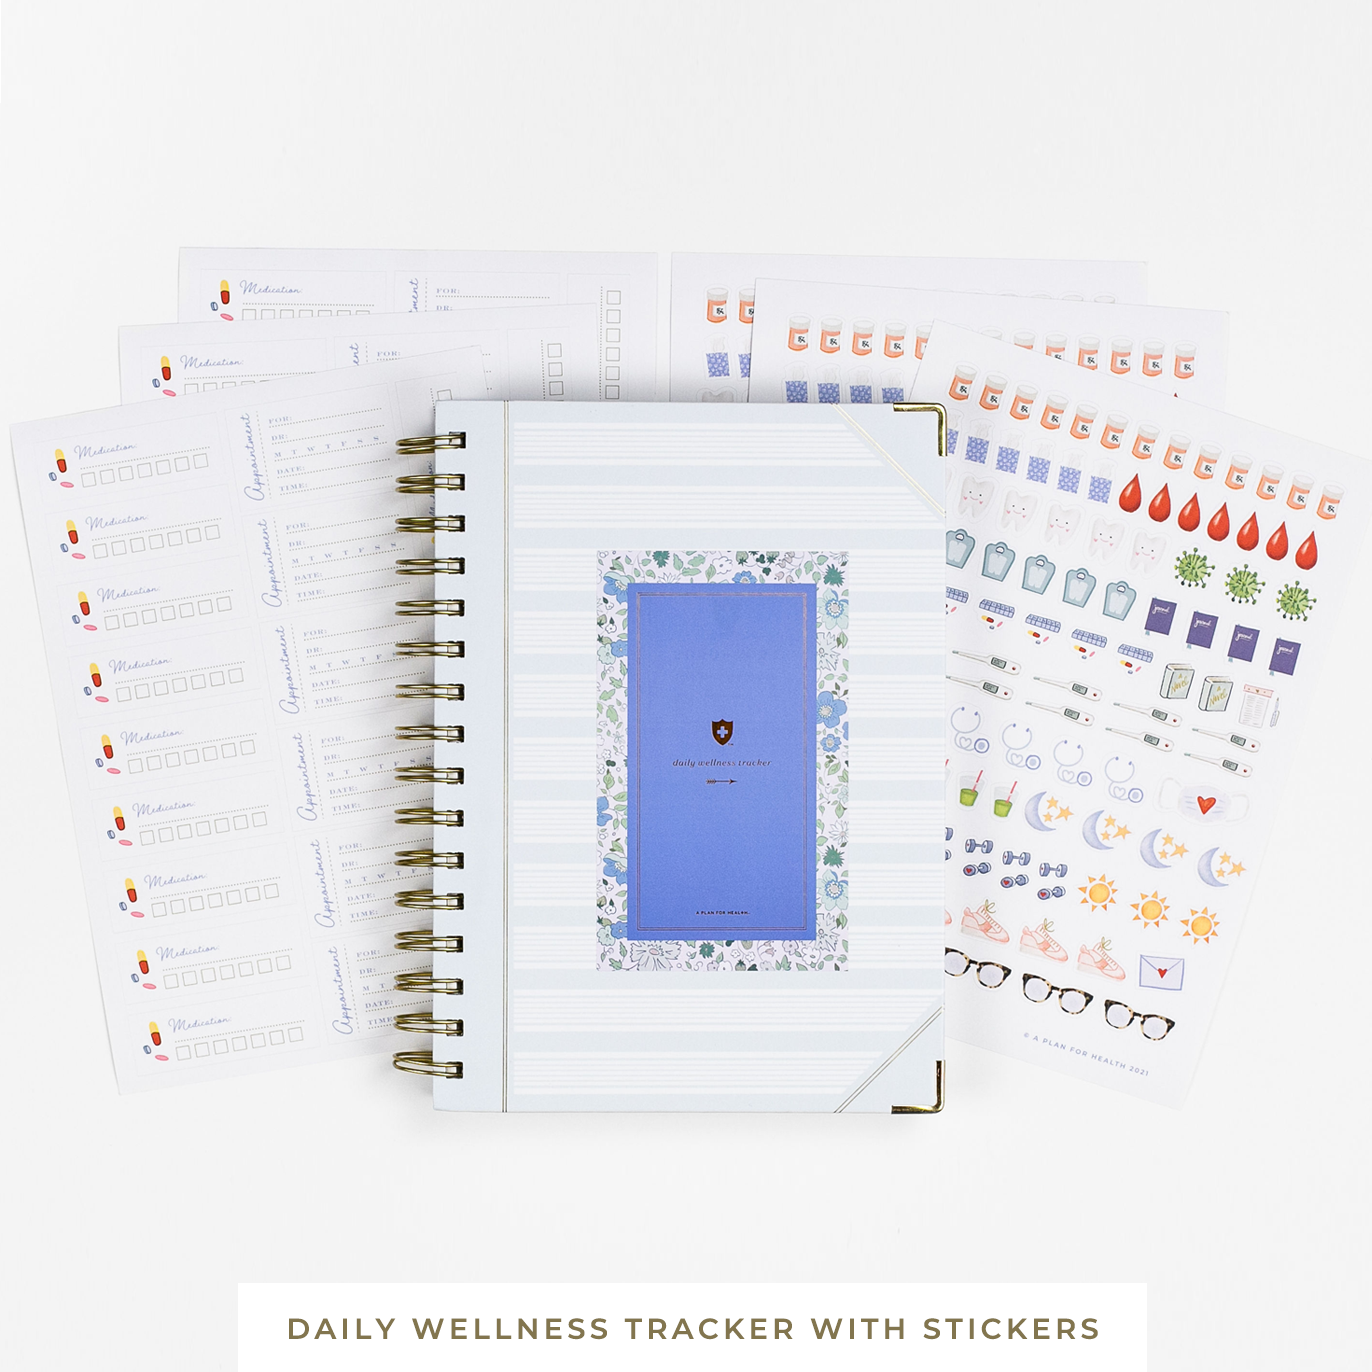 A Plan for Health • Daily Wellness Tracker